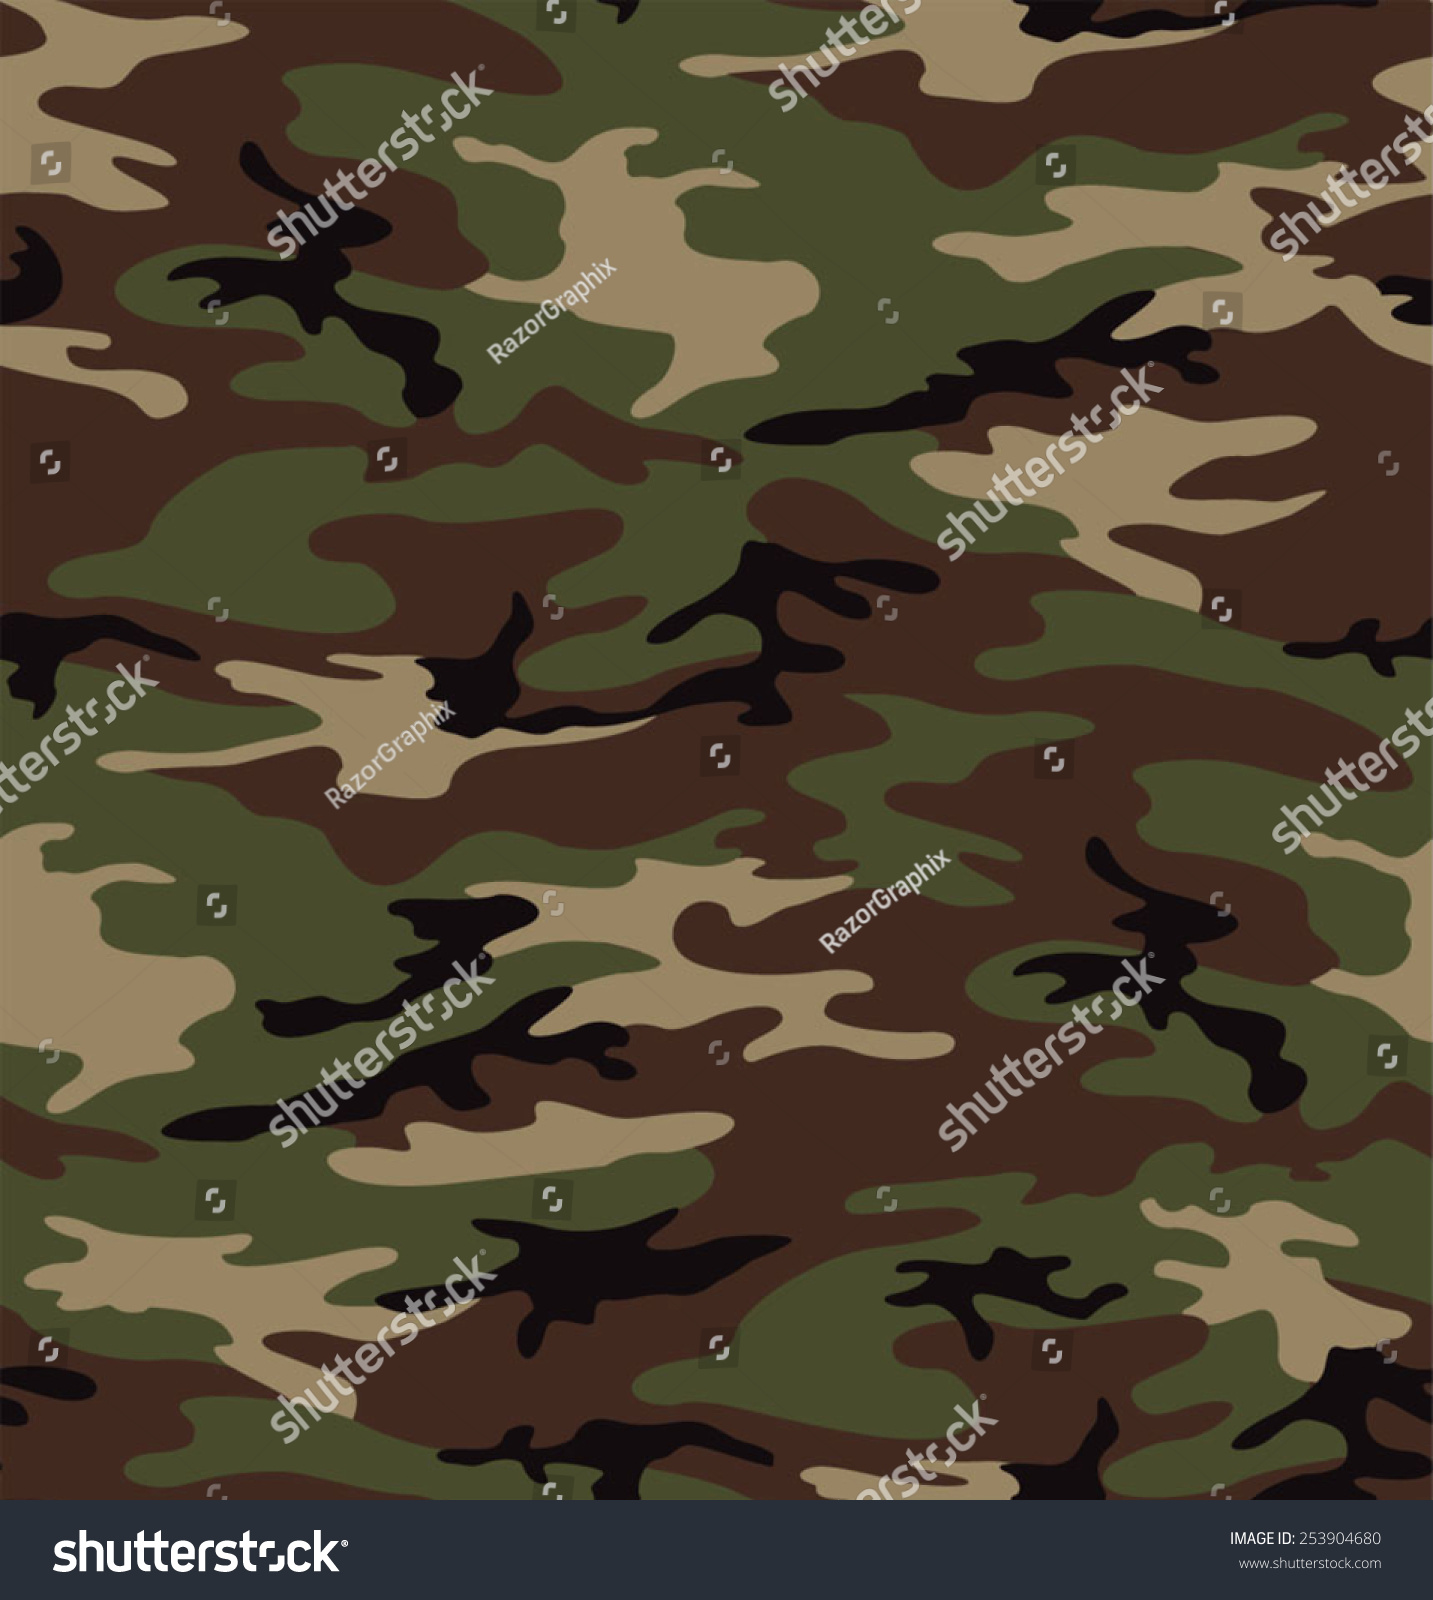 Army Camouflage Pictures Army Camouflage Seamless Pattern Stock Vector Illustration 253904680 : Shutterstock